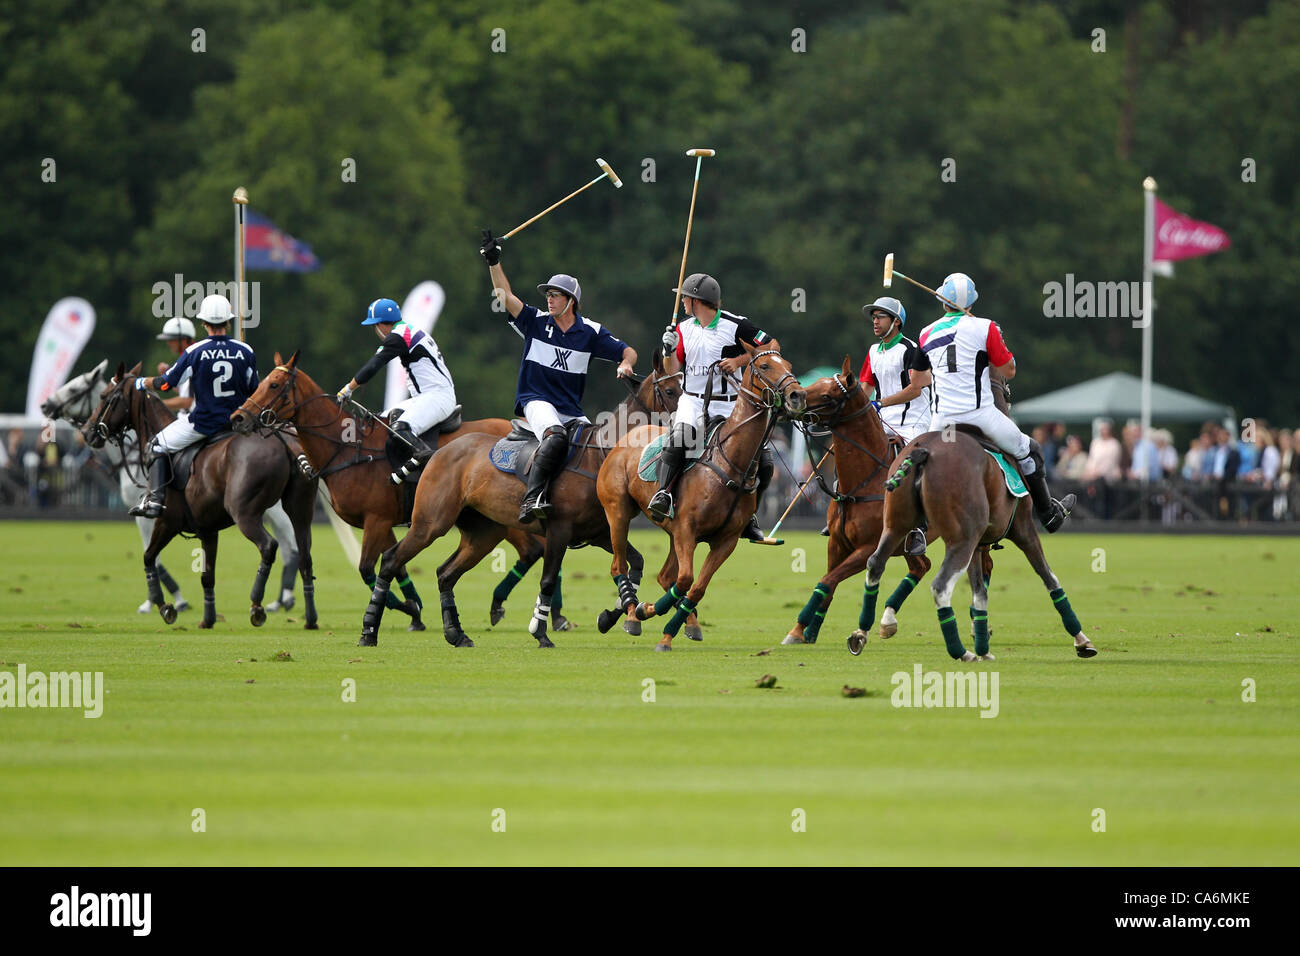 17.06.2012. Guards Polo Club, Windsor, Berkshire, England.   Dubai Team and Ayala Team at The Cartier Queen's Cup Final 2012 - Guards Polo Club Stock Photo